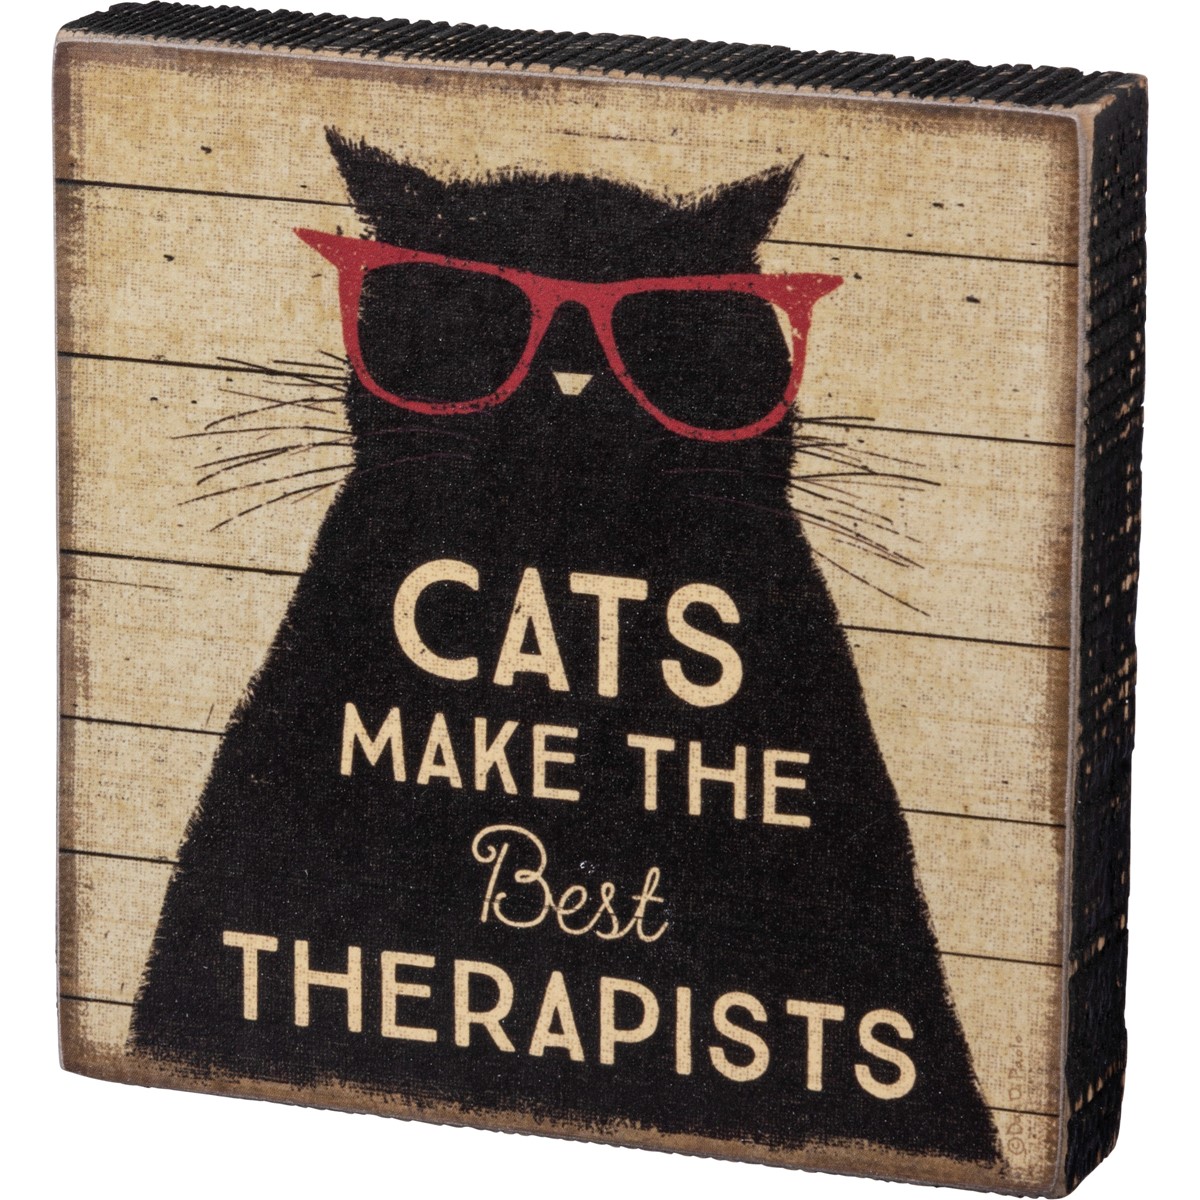 Cats Make The Best Therapists Block Sign - Wood, Paper